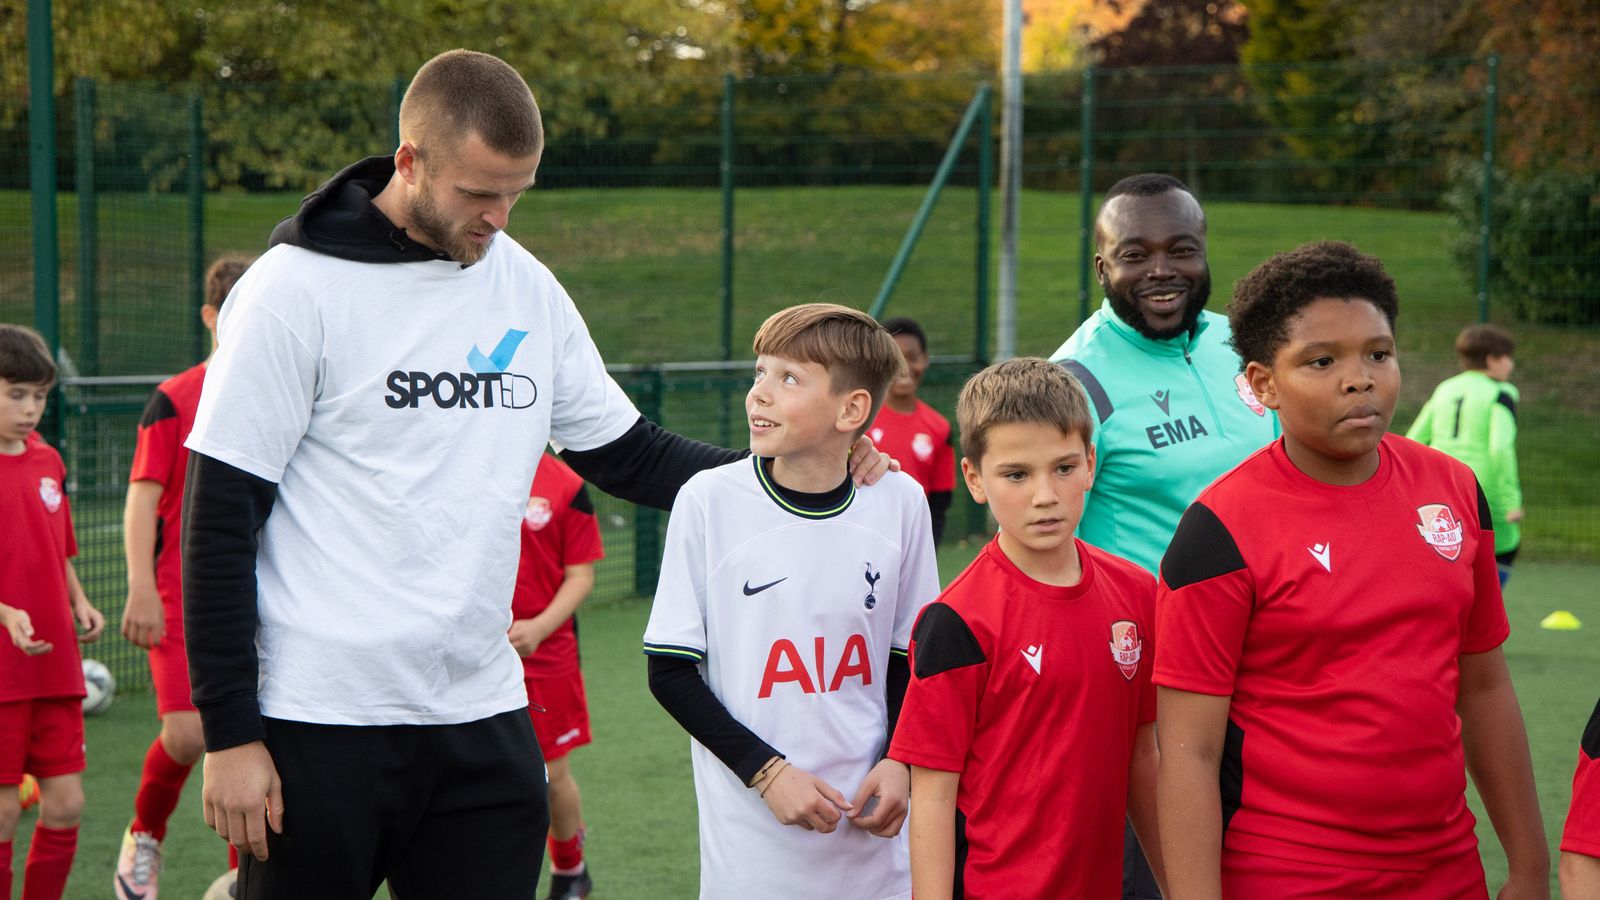 cost-of-living-crisis-spurs-and-england-s-eric-dier-extremely-concerned-about-impact-on-grassroots-sport